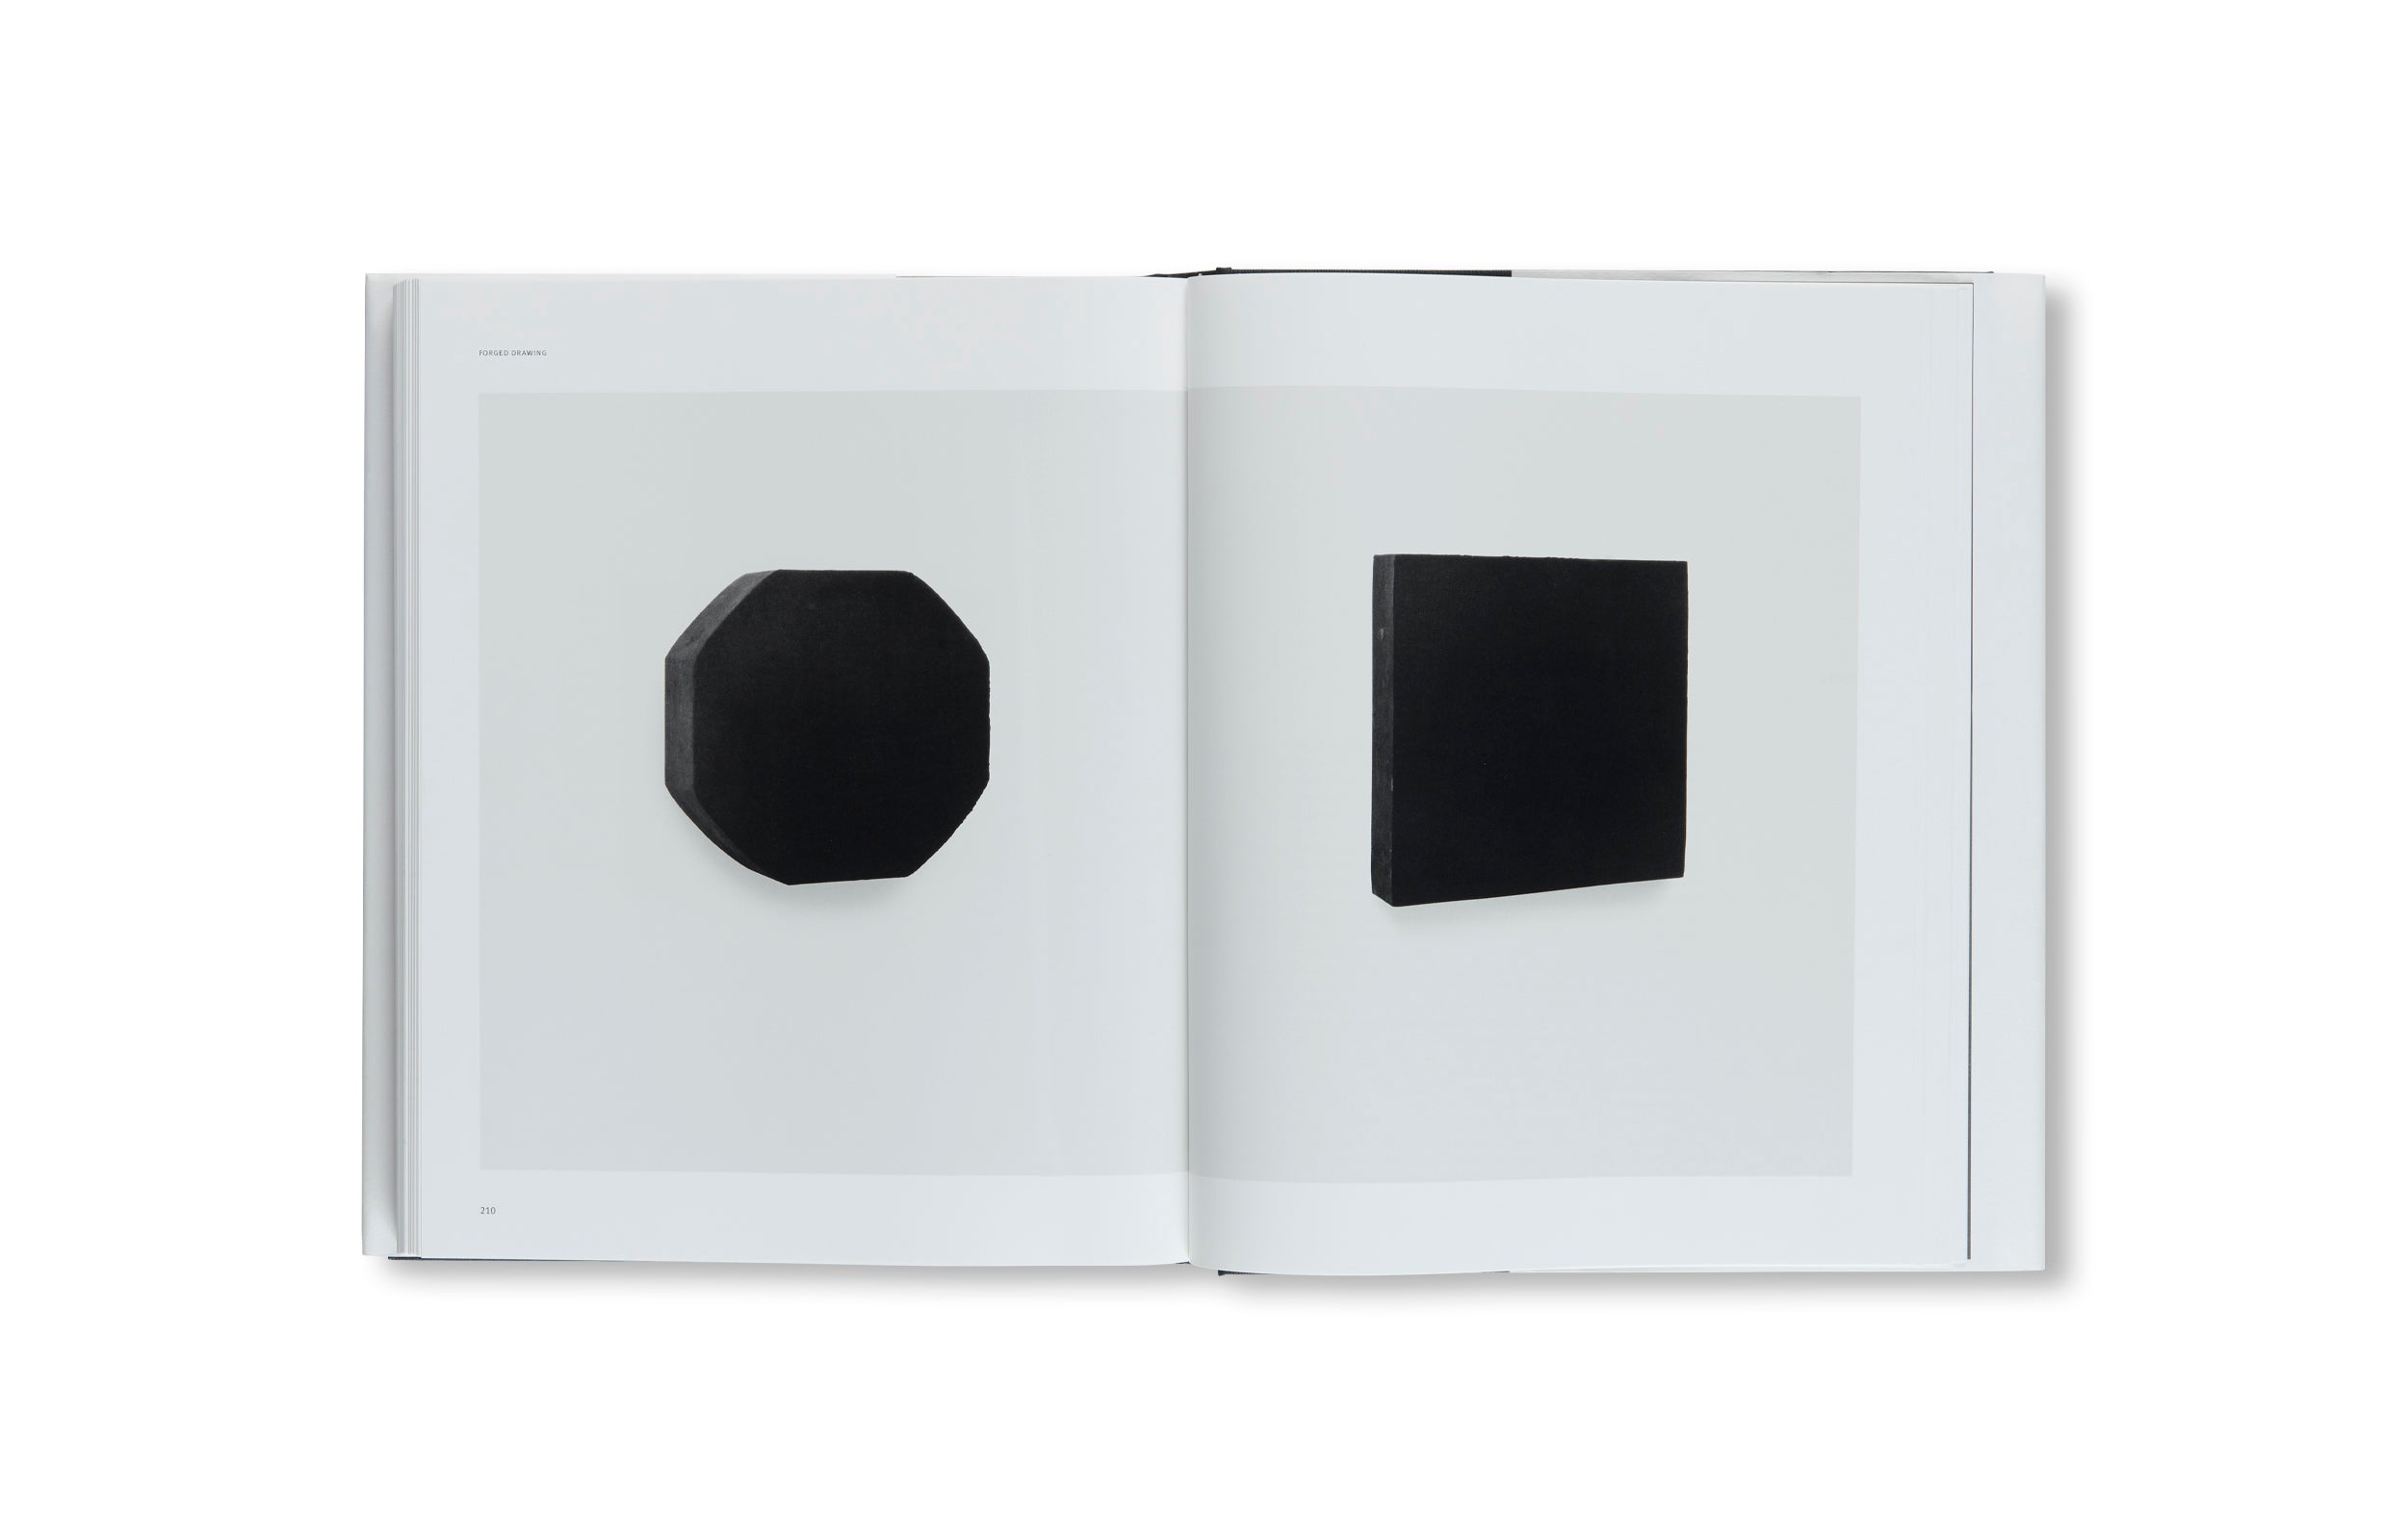 DRAWINGS WORK COMES OUT OF WORK by Richard Serra